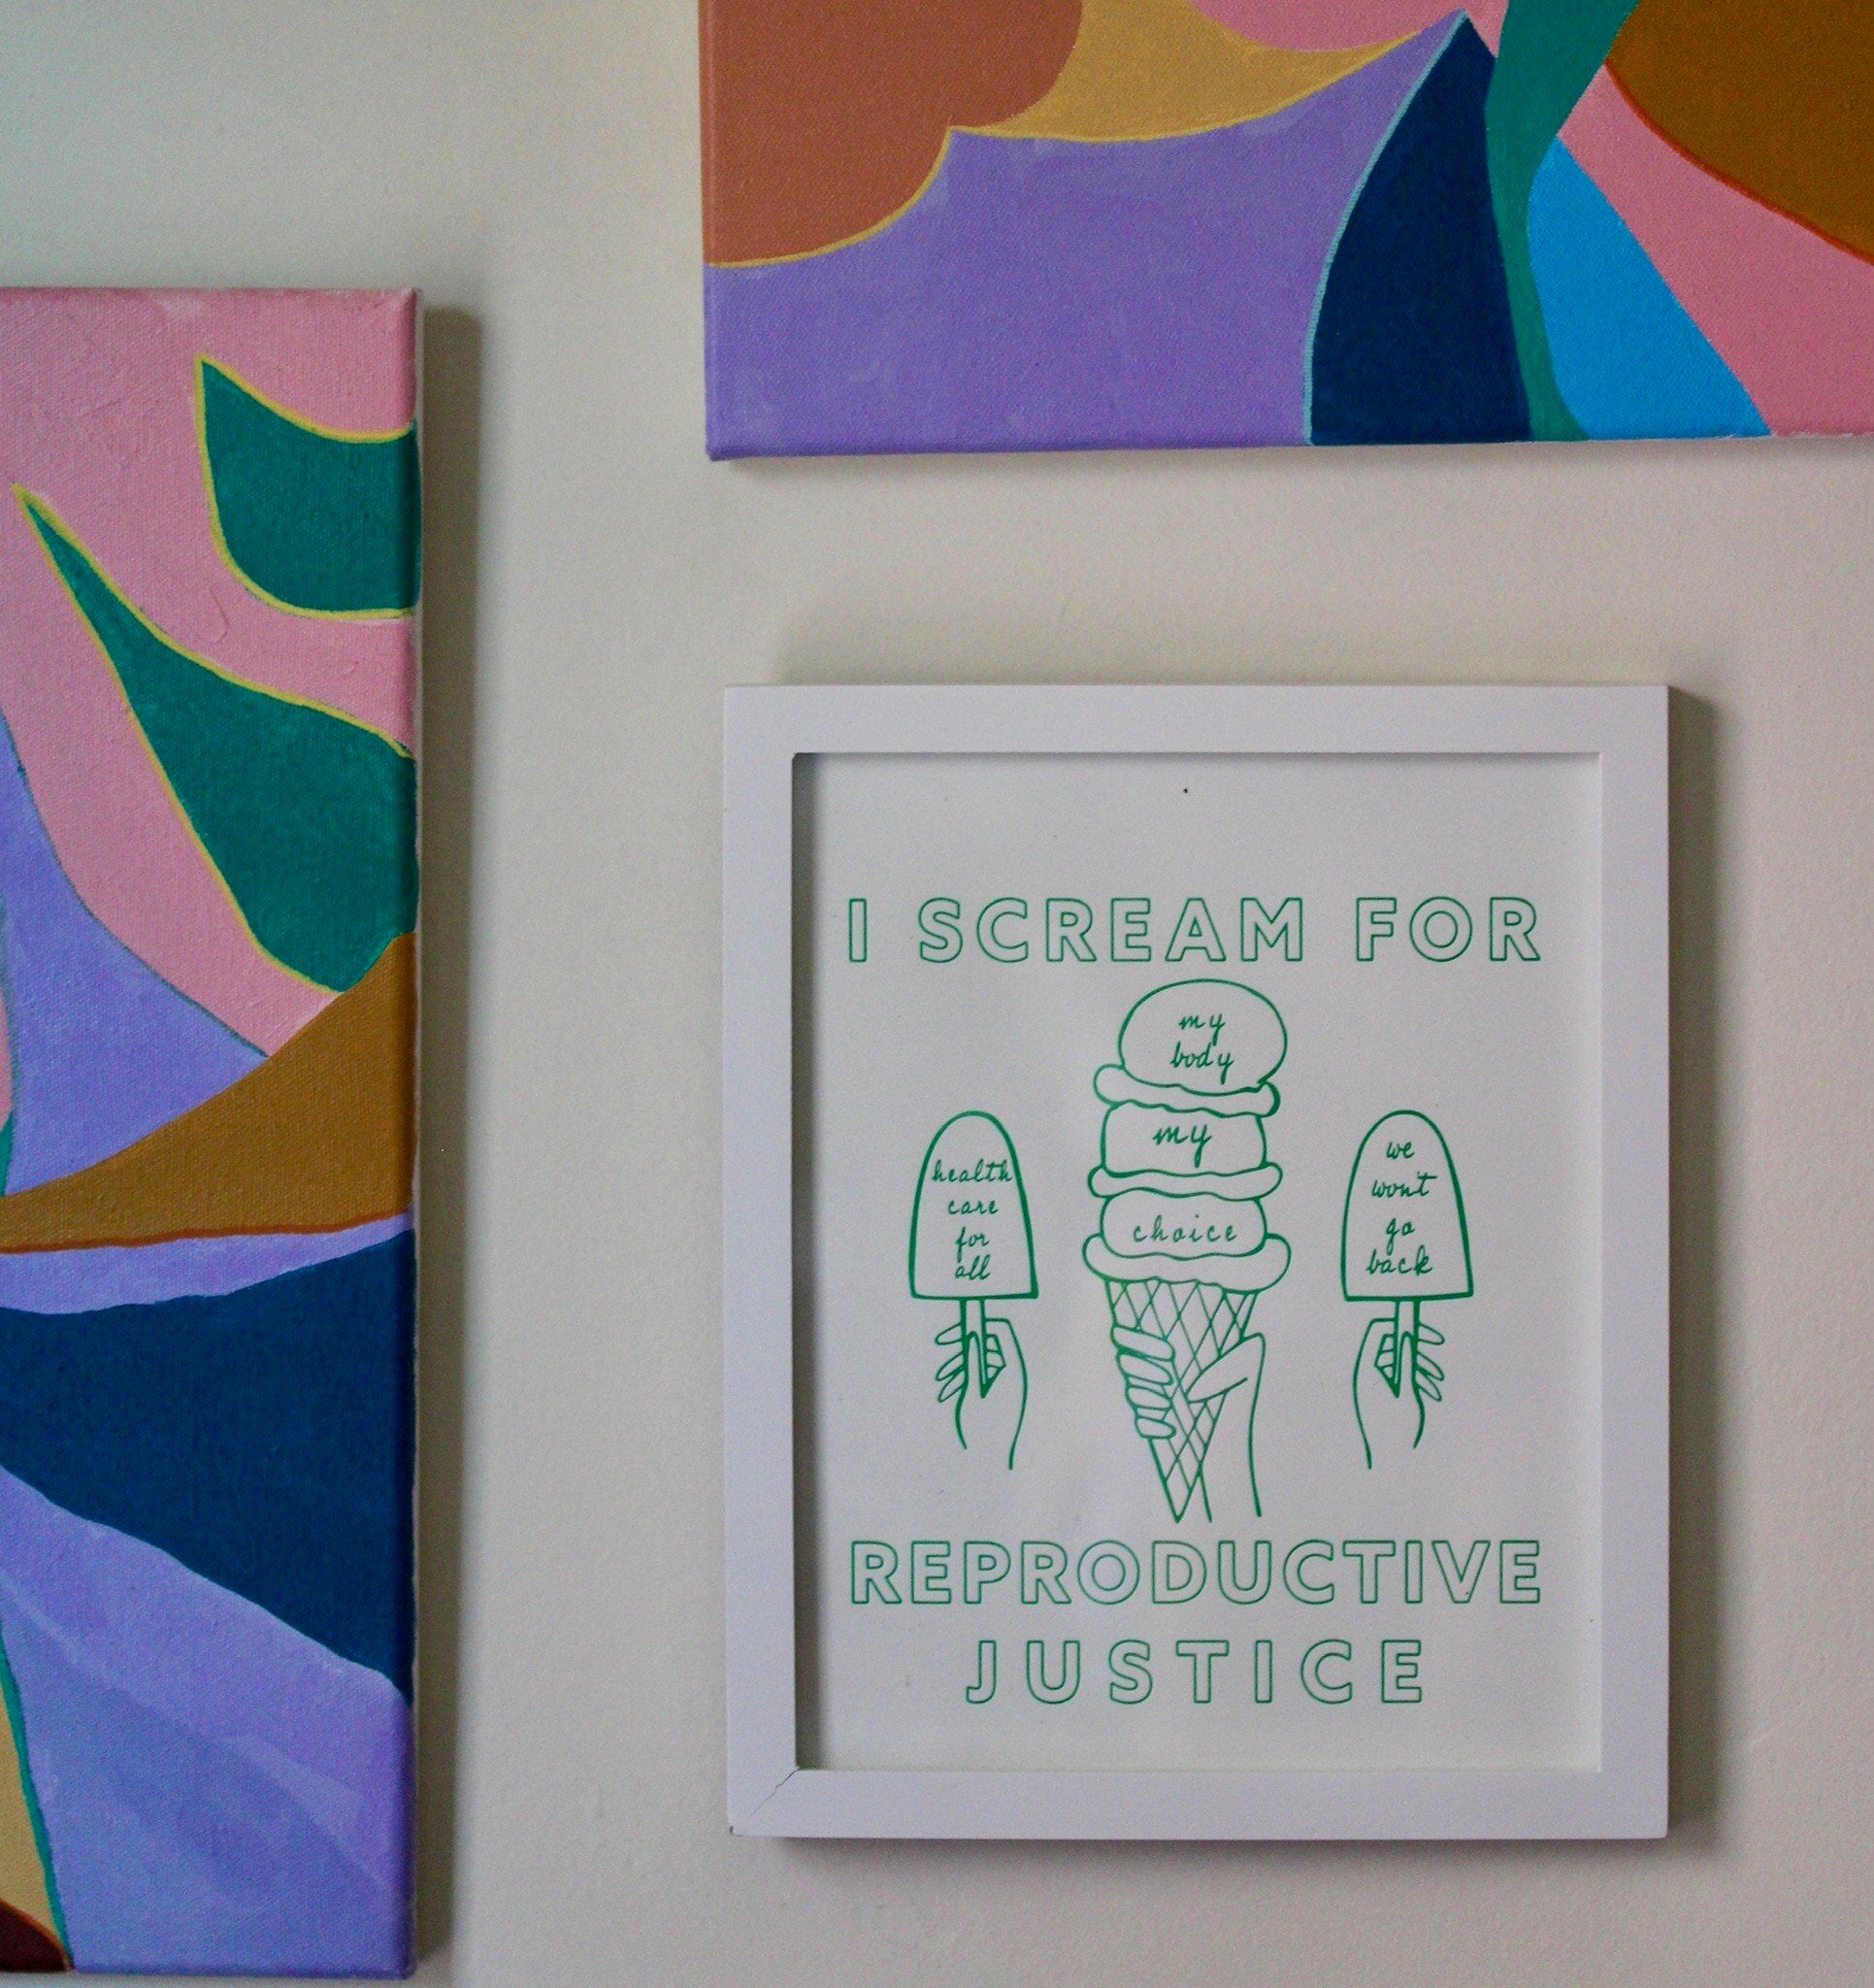 A framed print that reads "I Scream for Reproductive Justice" in mint green with ice cream illustrations on a wall